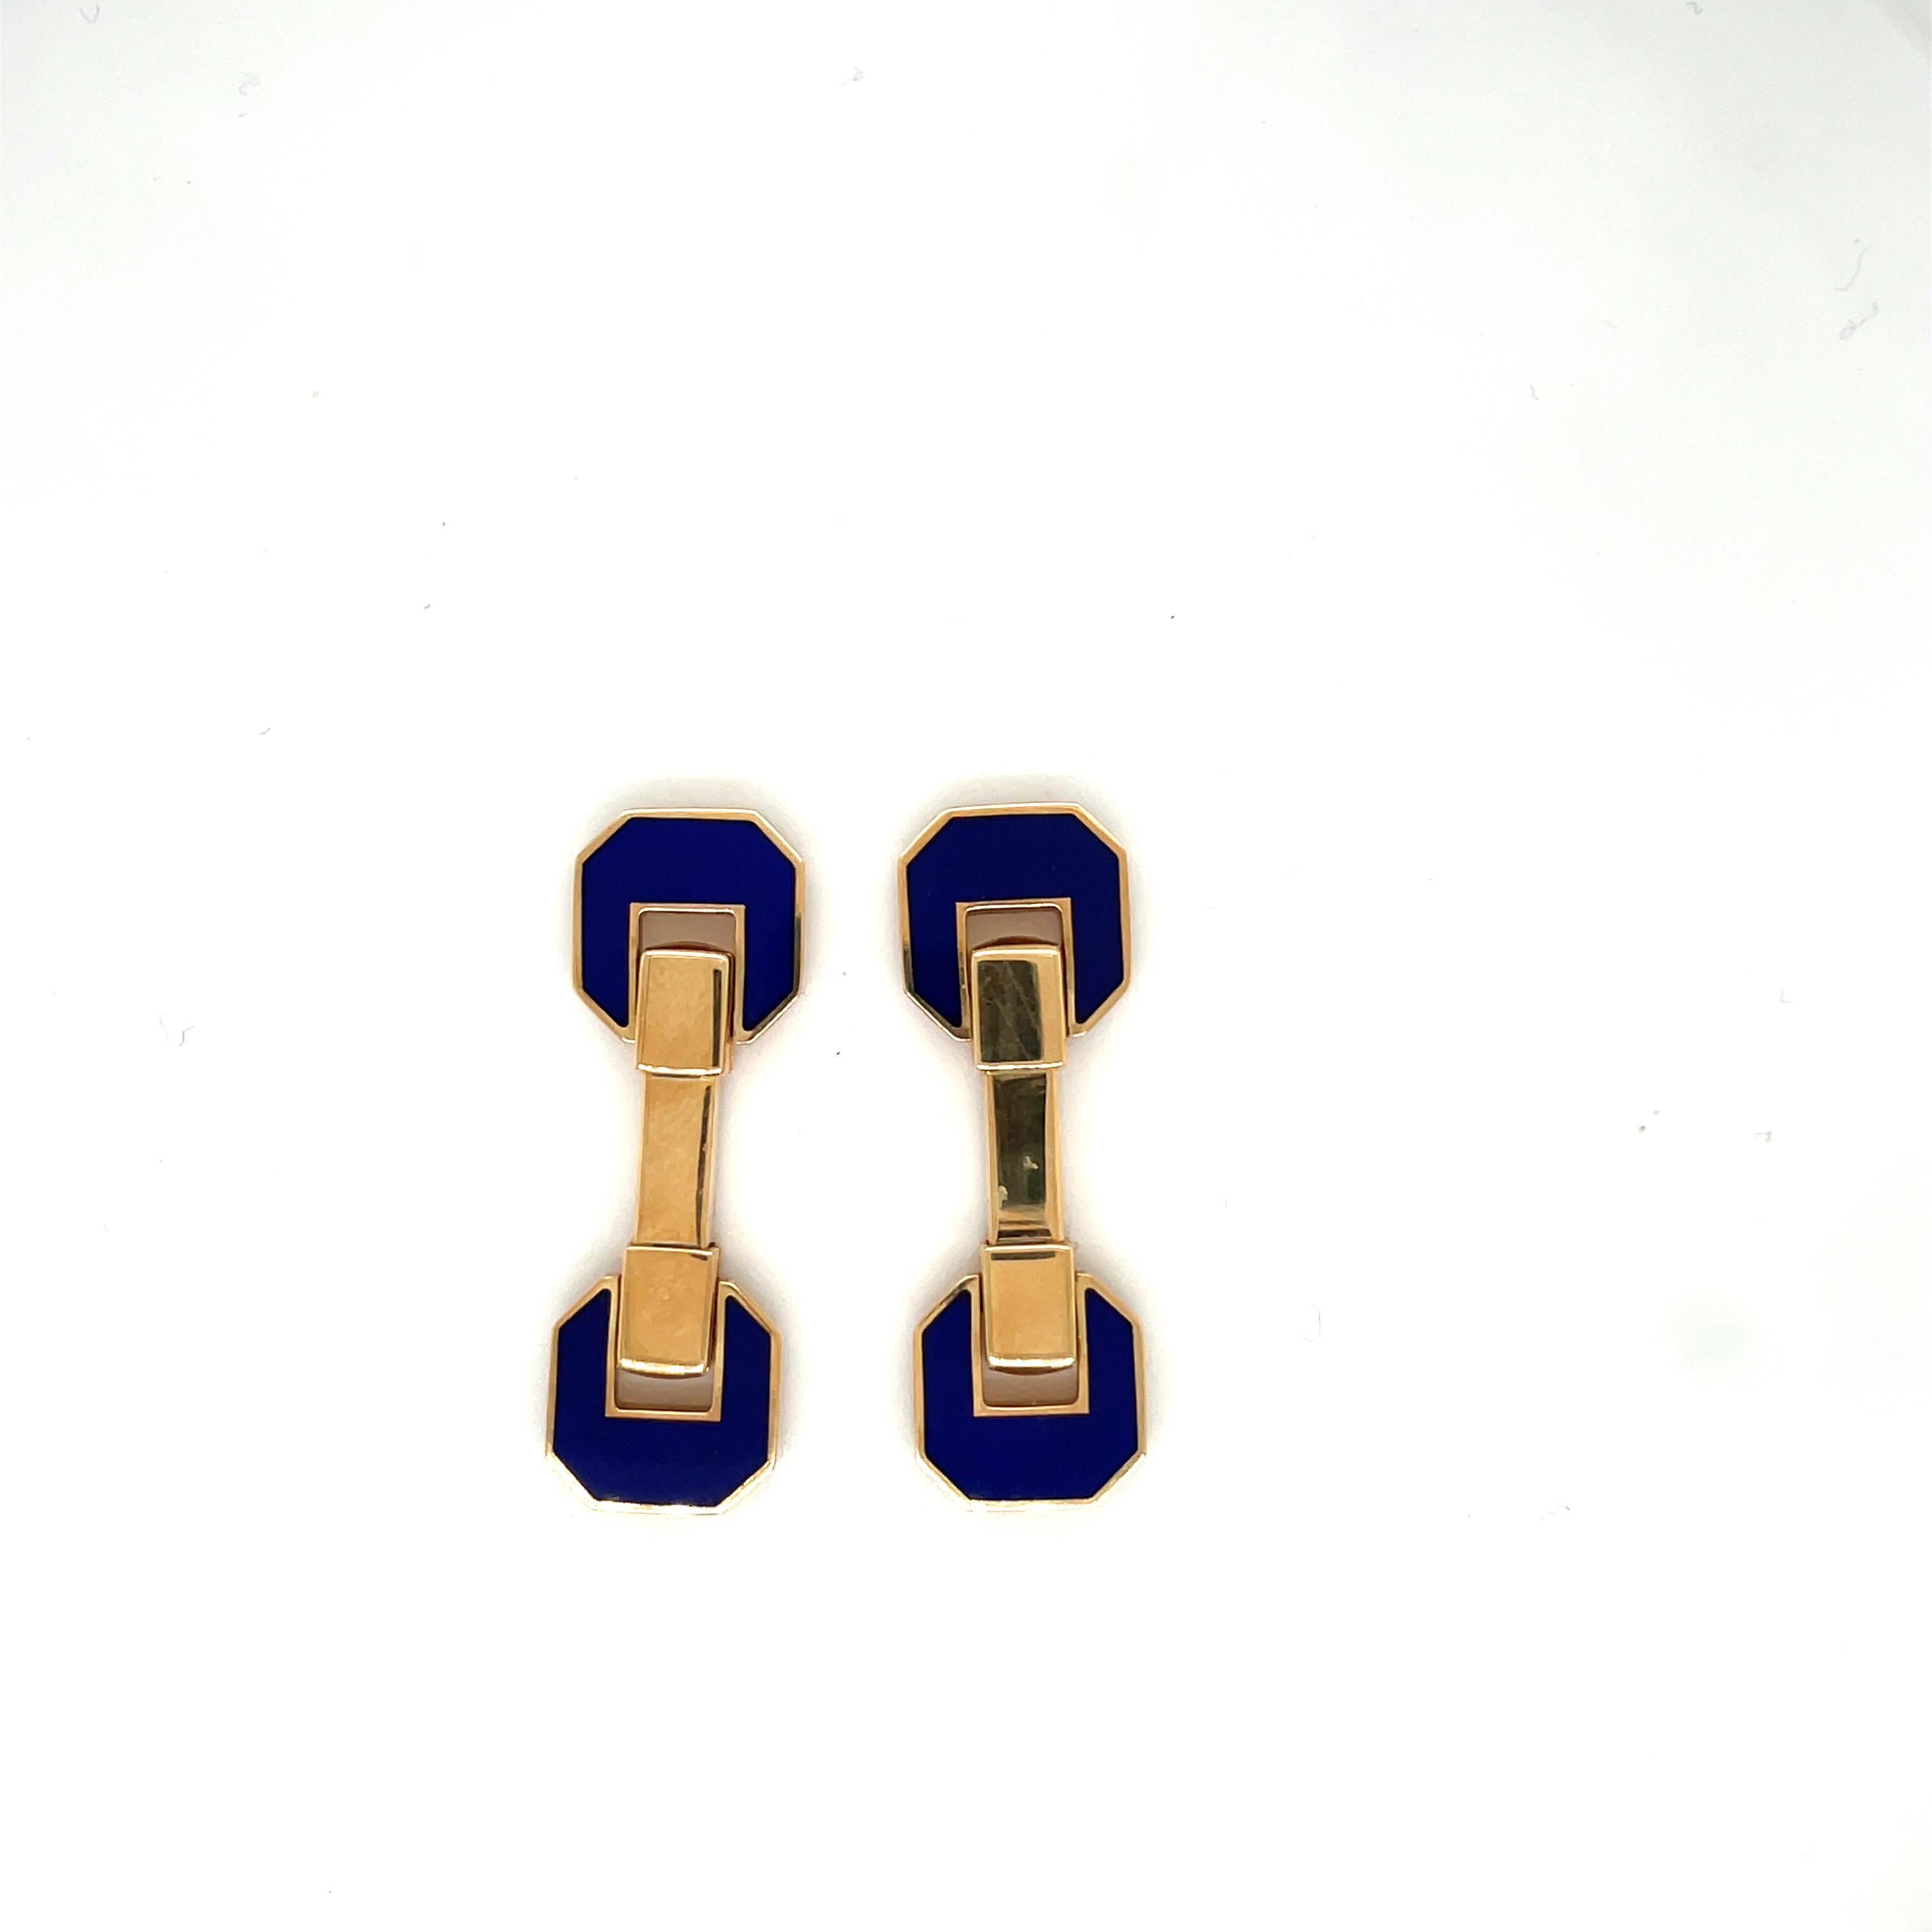 Retro George Gero 18KT Yellow Gold Cuff Links with Blue Enamel For Sale